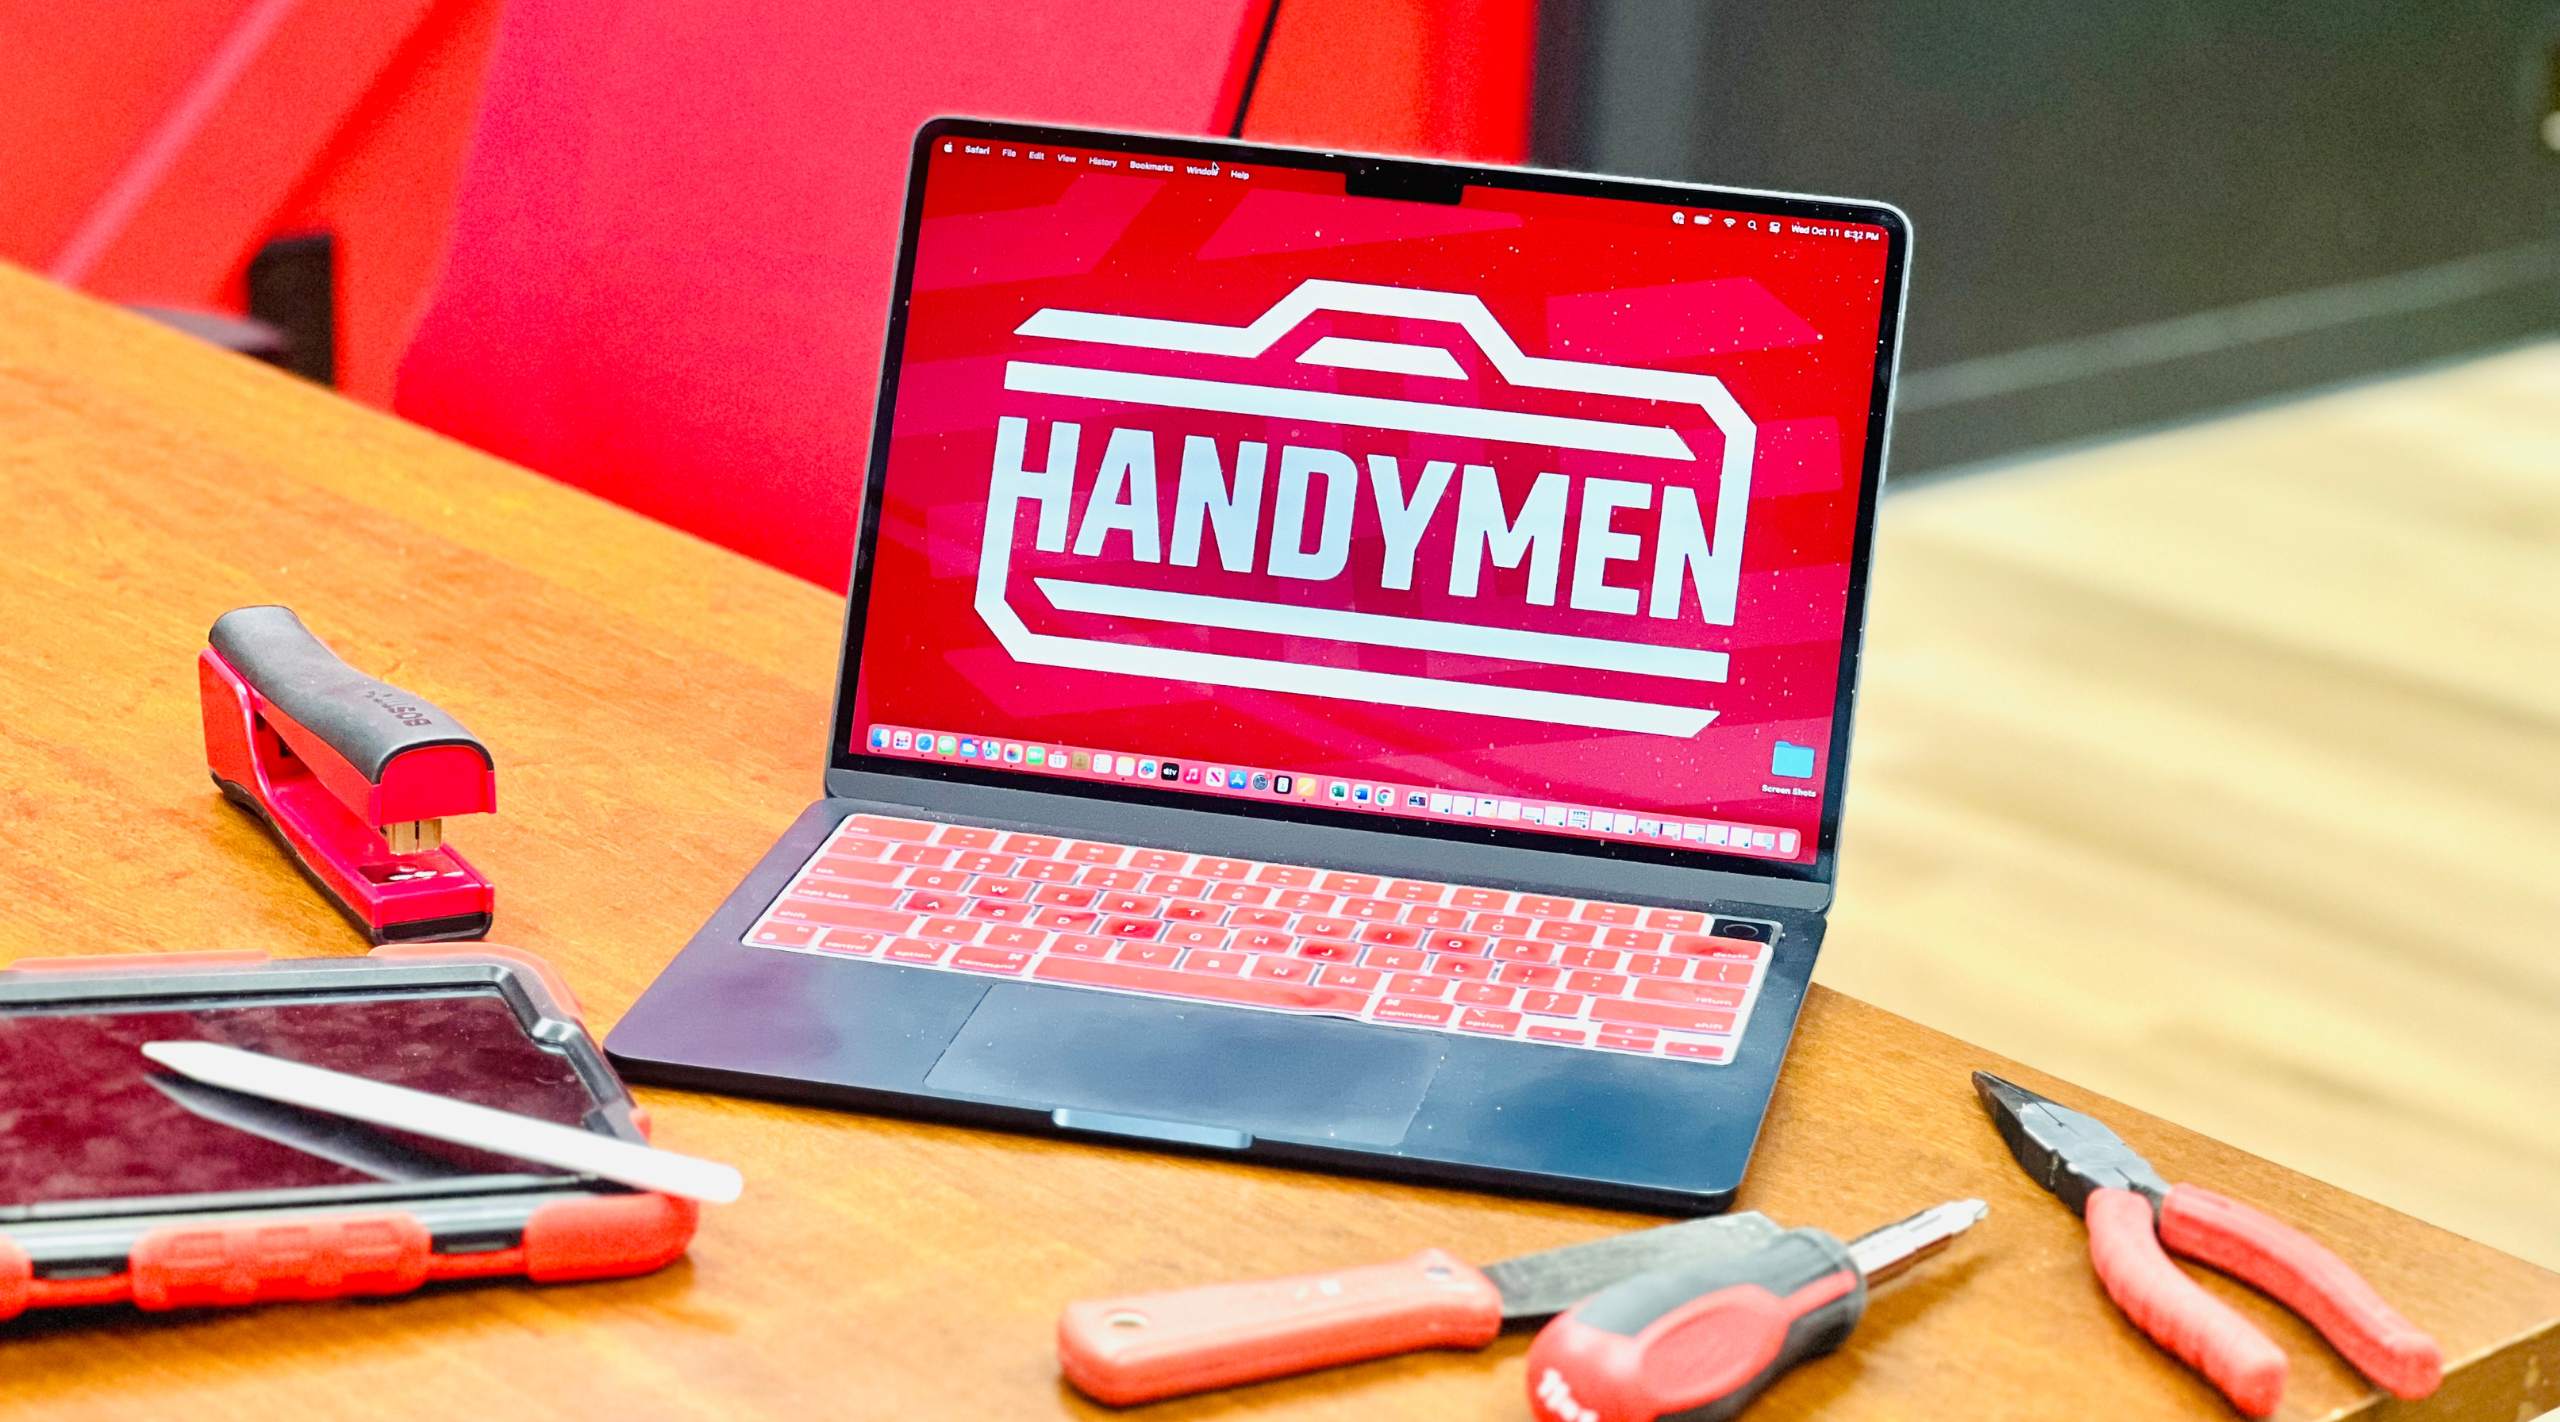 Image of a laptop computer opened to the red "Handymen" logo. Computer is resting on a table with tools and a tablet.